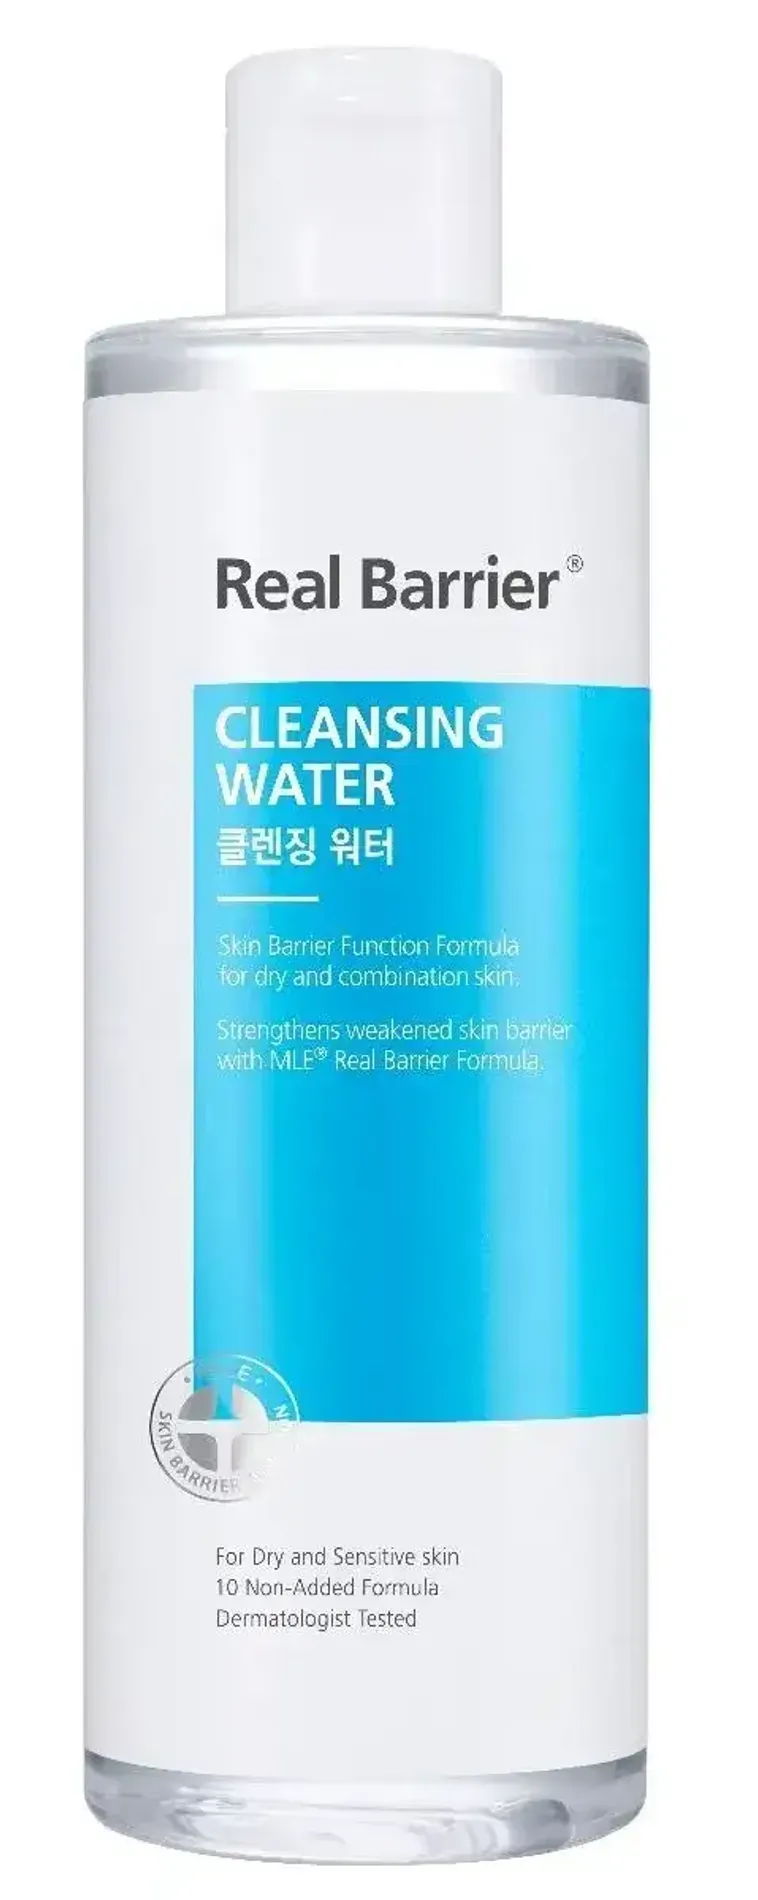 nuoc-tay-trang-real-barrier-cleansing-water-410ml-3